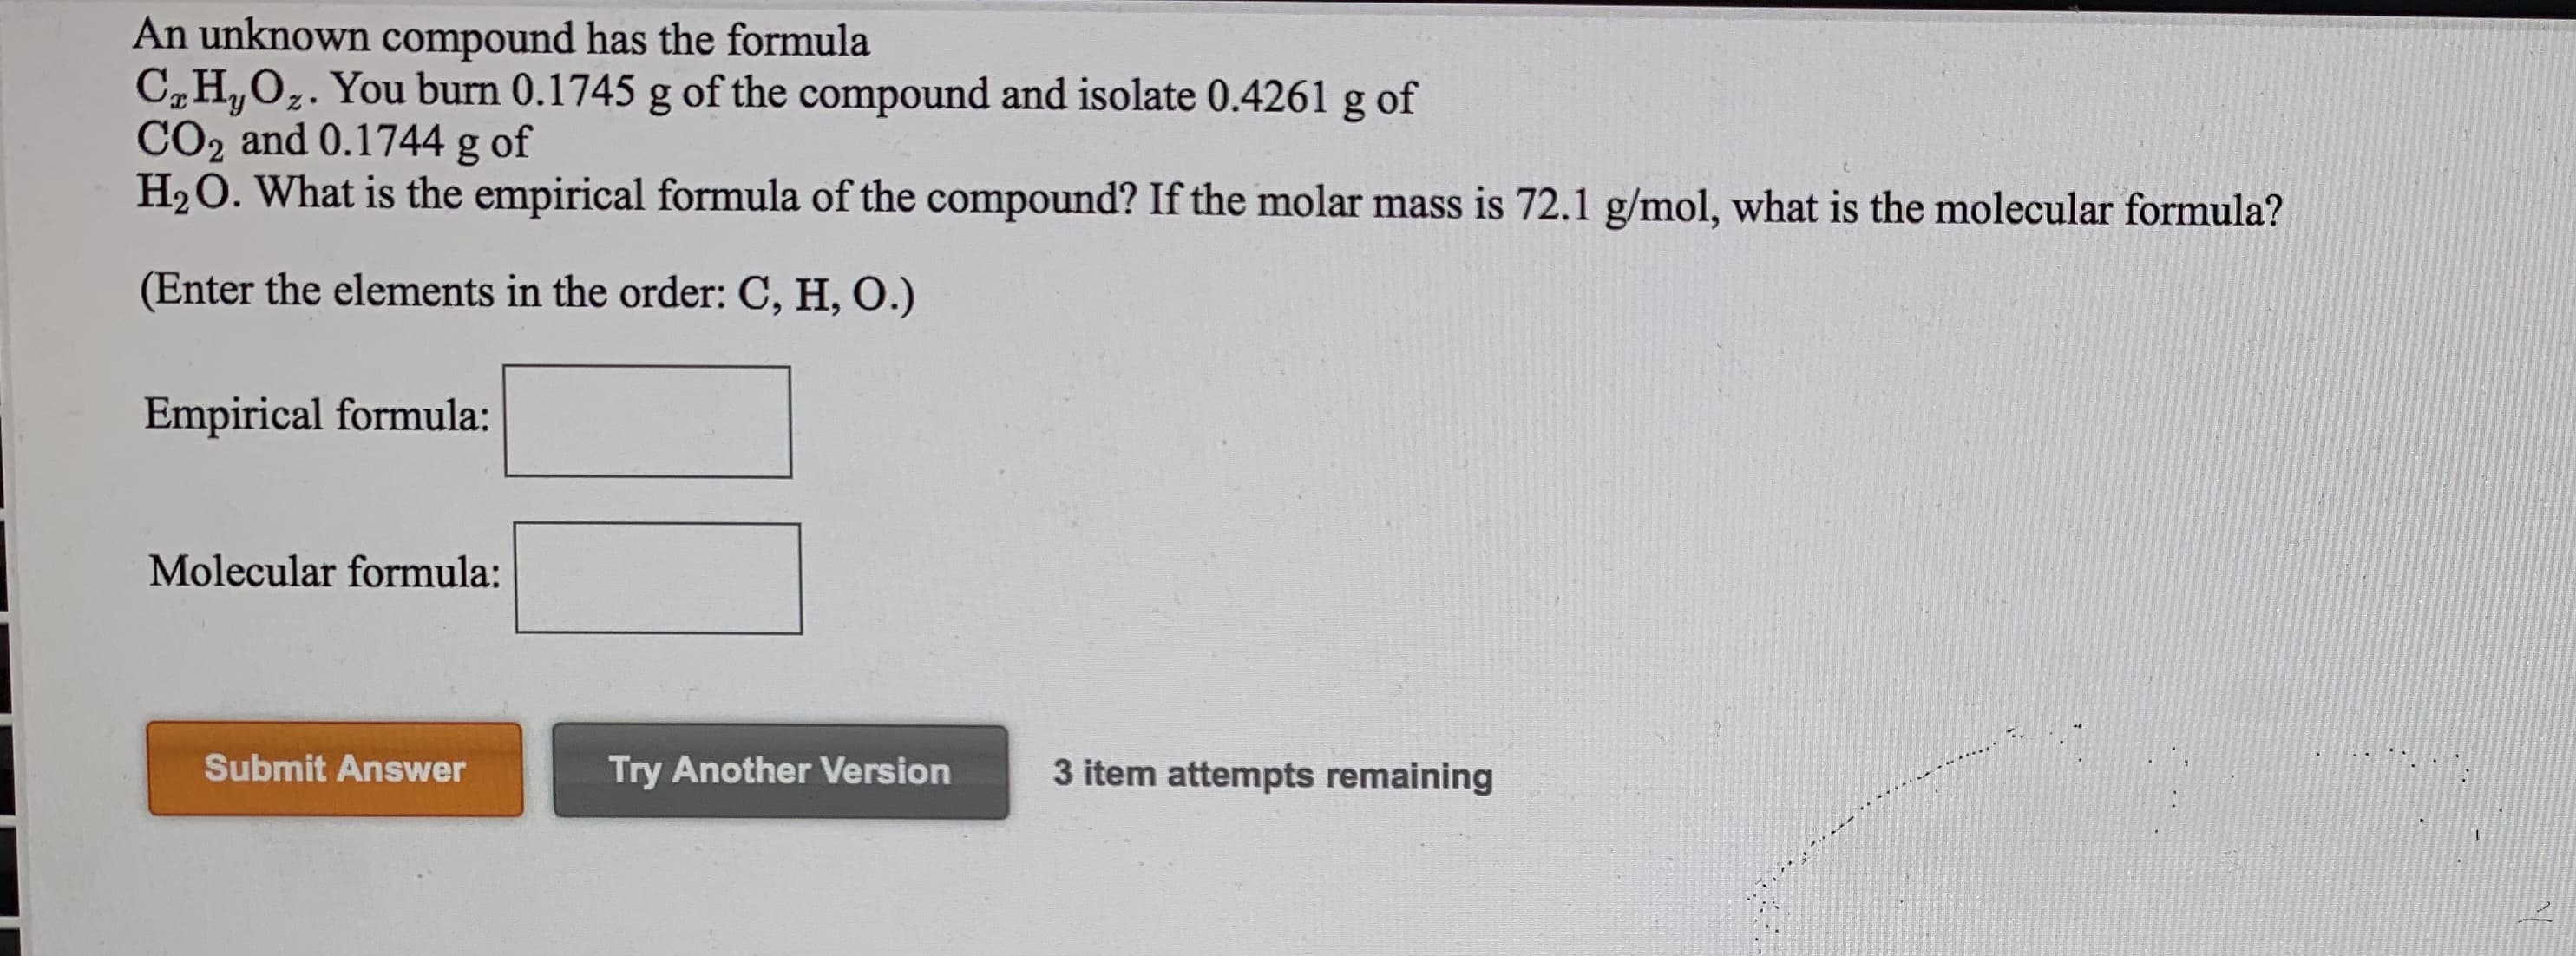 An unknown compound has the formula
C„H,Oz. You burn 0.1745 g of the compound and isolate 0.4261 g of
CO2 and 0.1744 g of
H2O. What is the empirical formula of the compound? If the molar mass is 72.1 g/mol, what is the molecular formula?
(Enter the elements in the order: C, H, O.)
Empirical formula:
Molecular formula:
